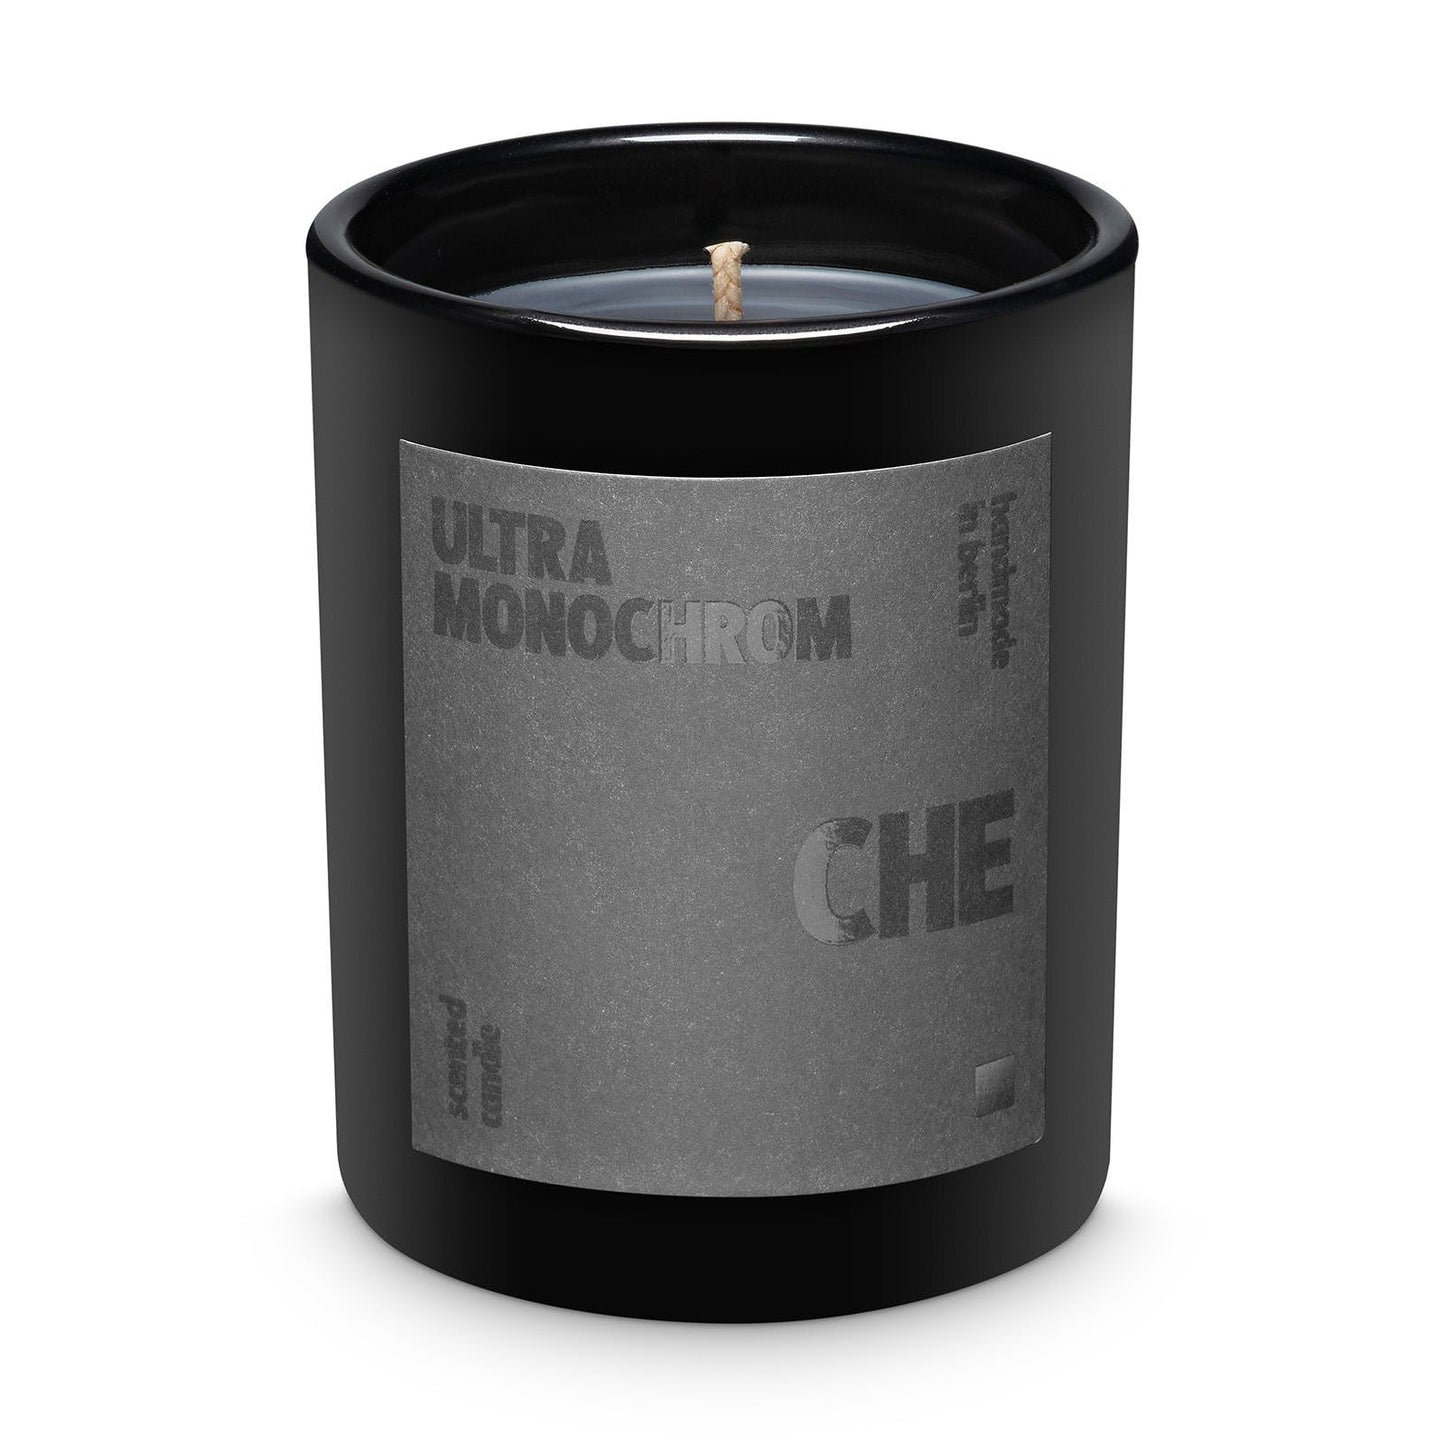 Ultramonochrom che scented soy candle.